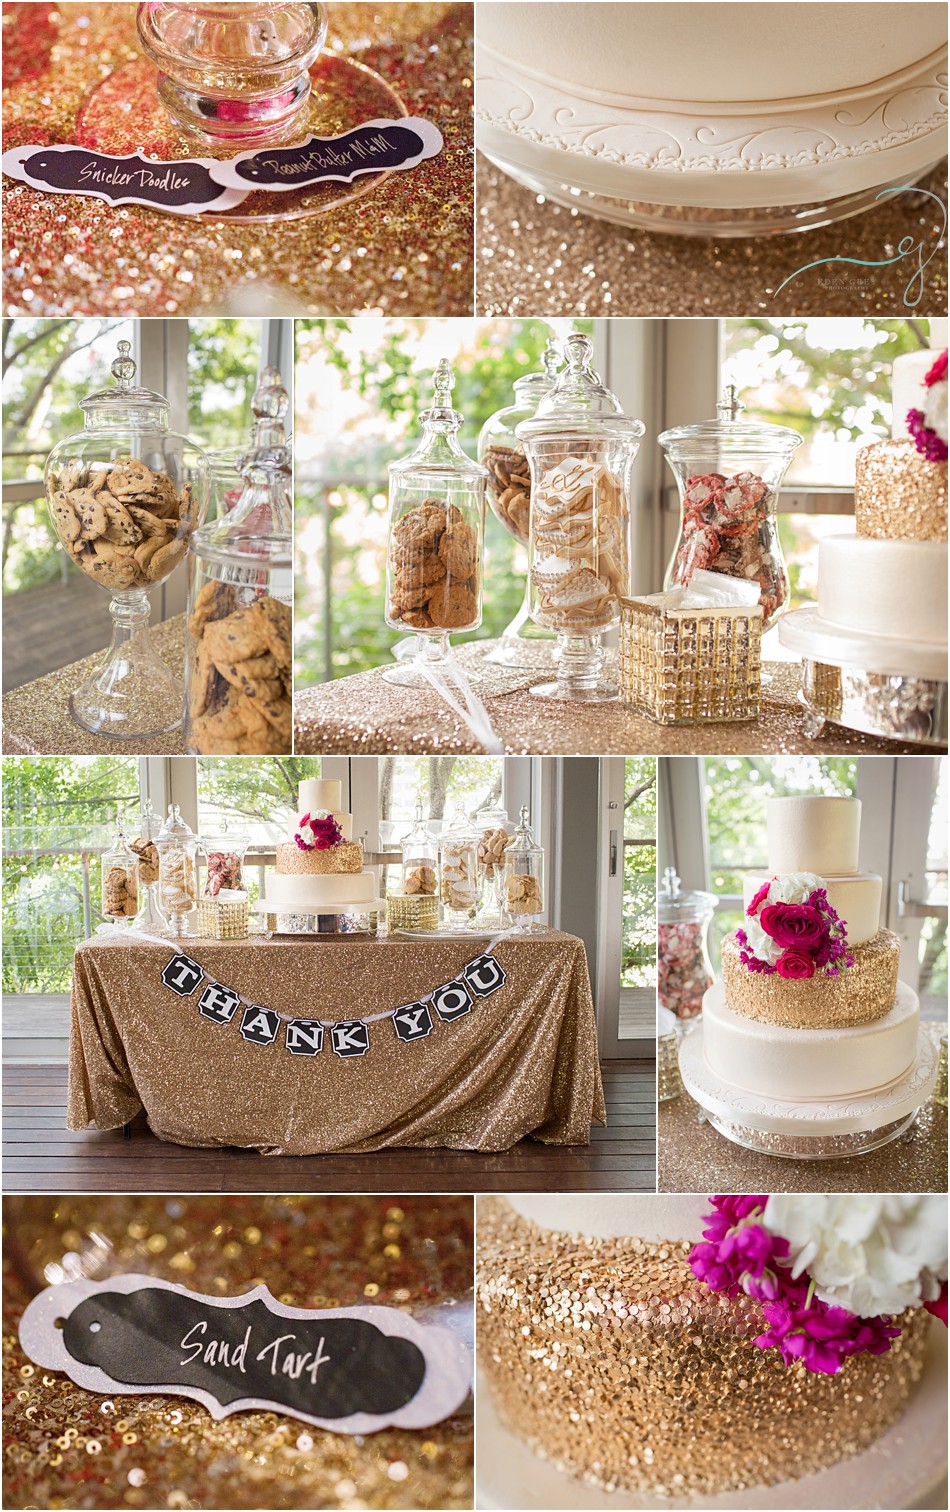 Wedding Cakes and Cookie Bar at The Grove